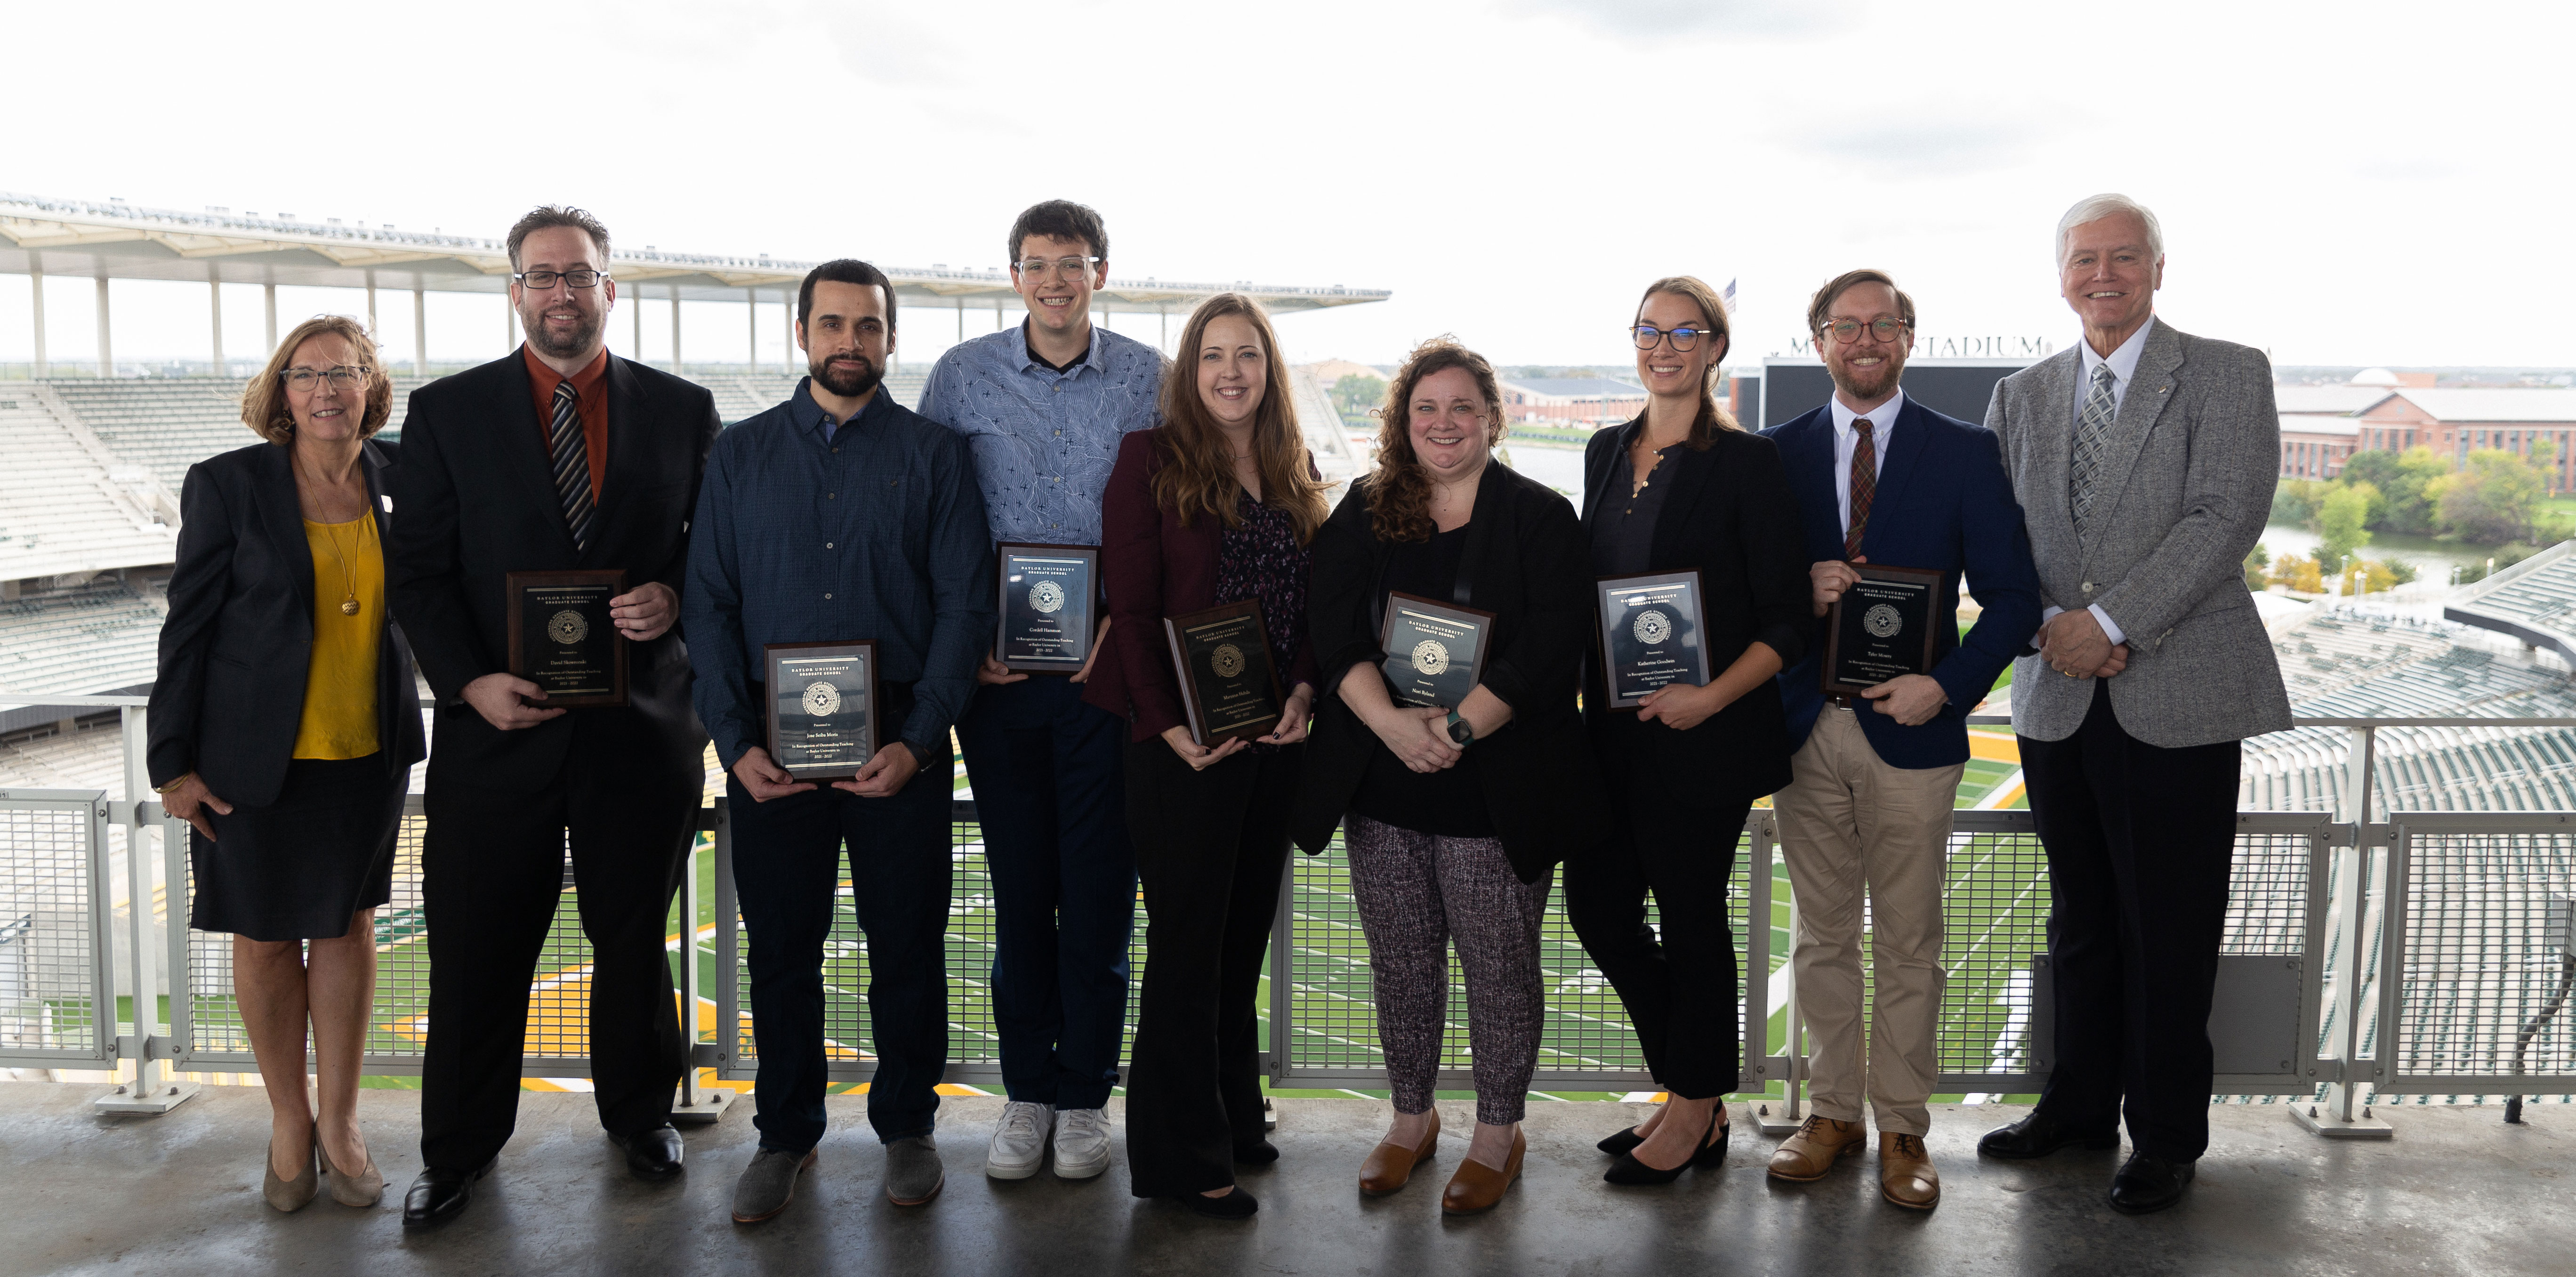 The 2021-22 Outstanding Graduate Student Award recipients with Provost Nancy Brickhouse and Graduate School Dean Larry Lyon